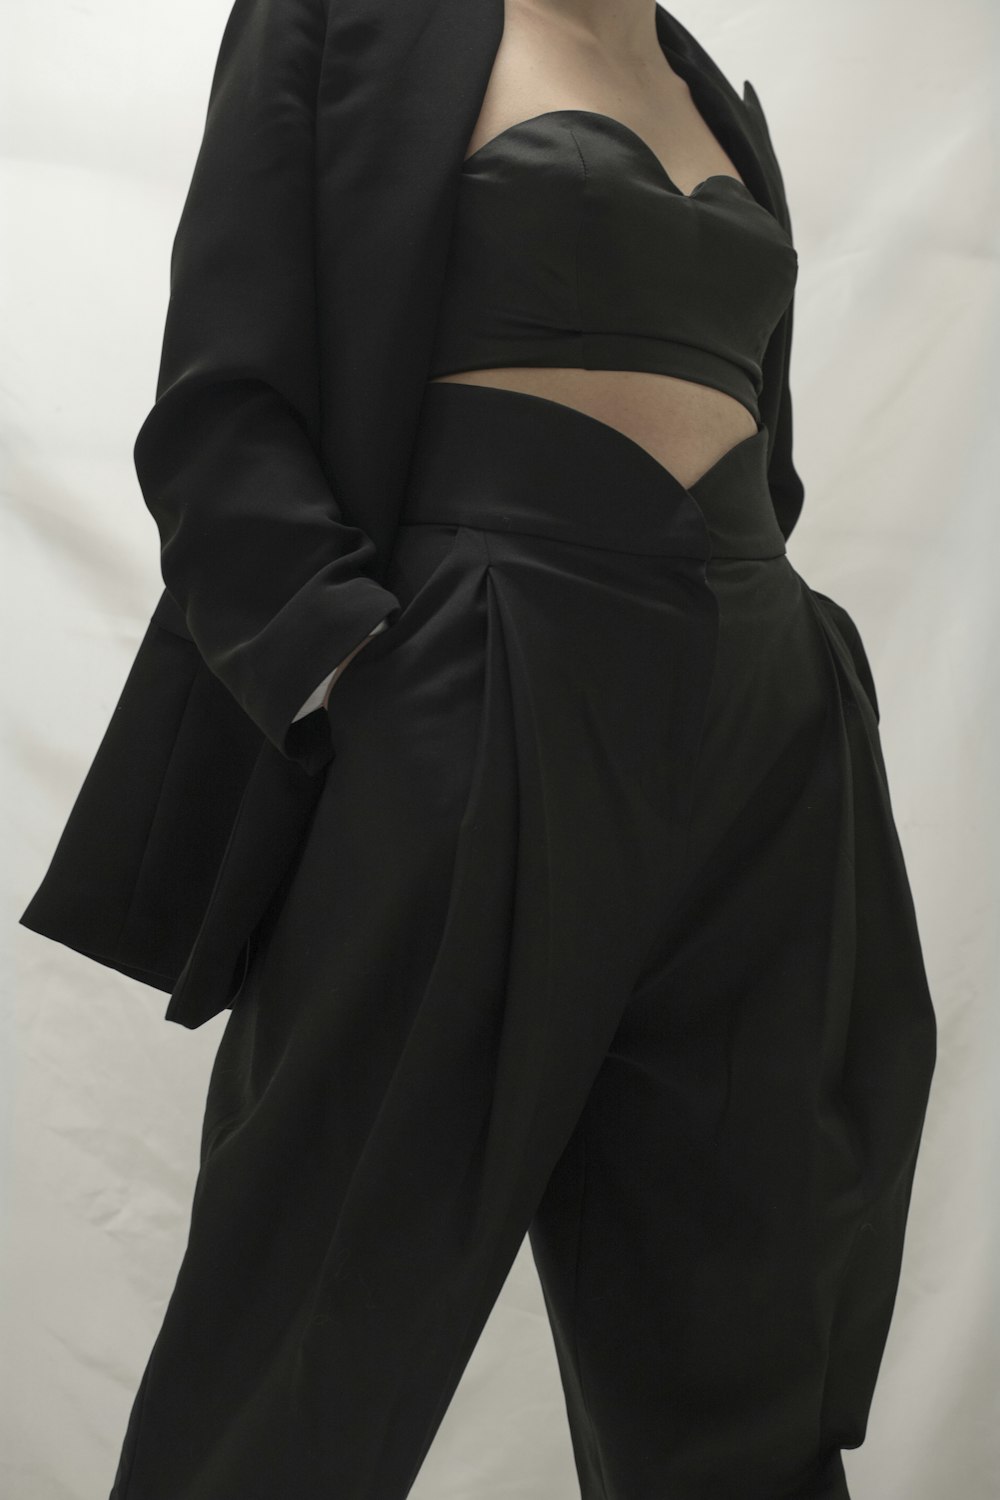 a woman wearing a black suit and pants